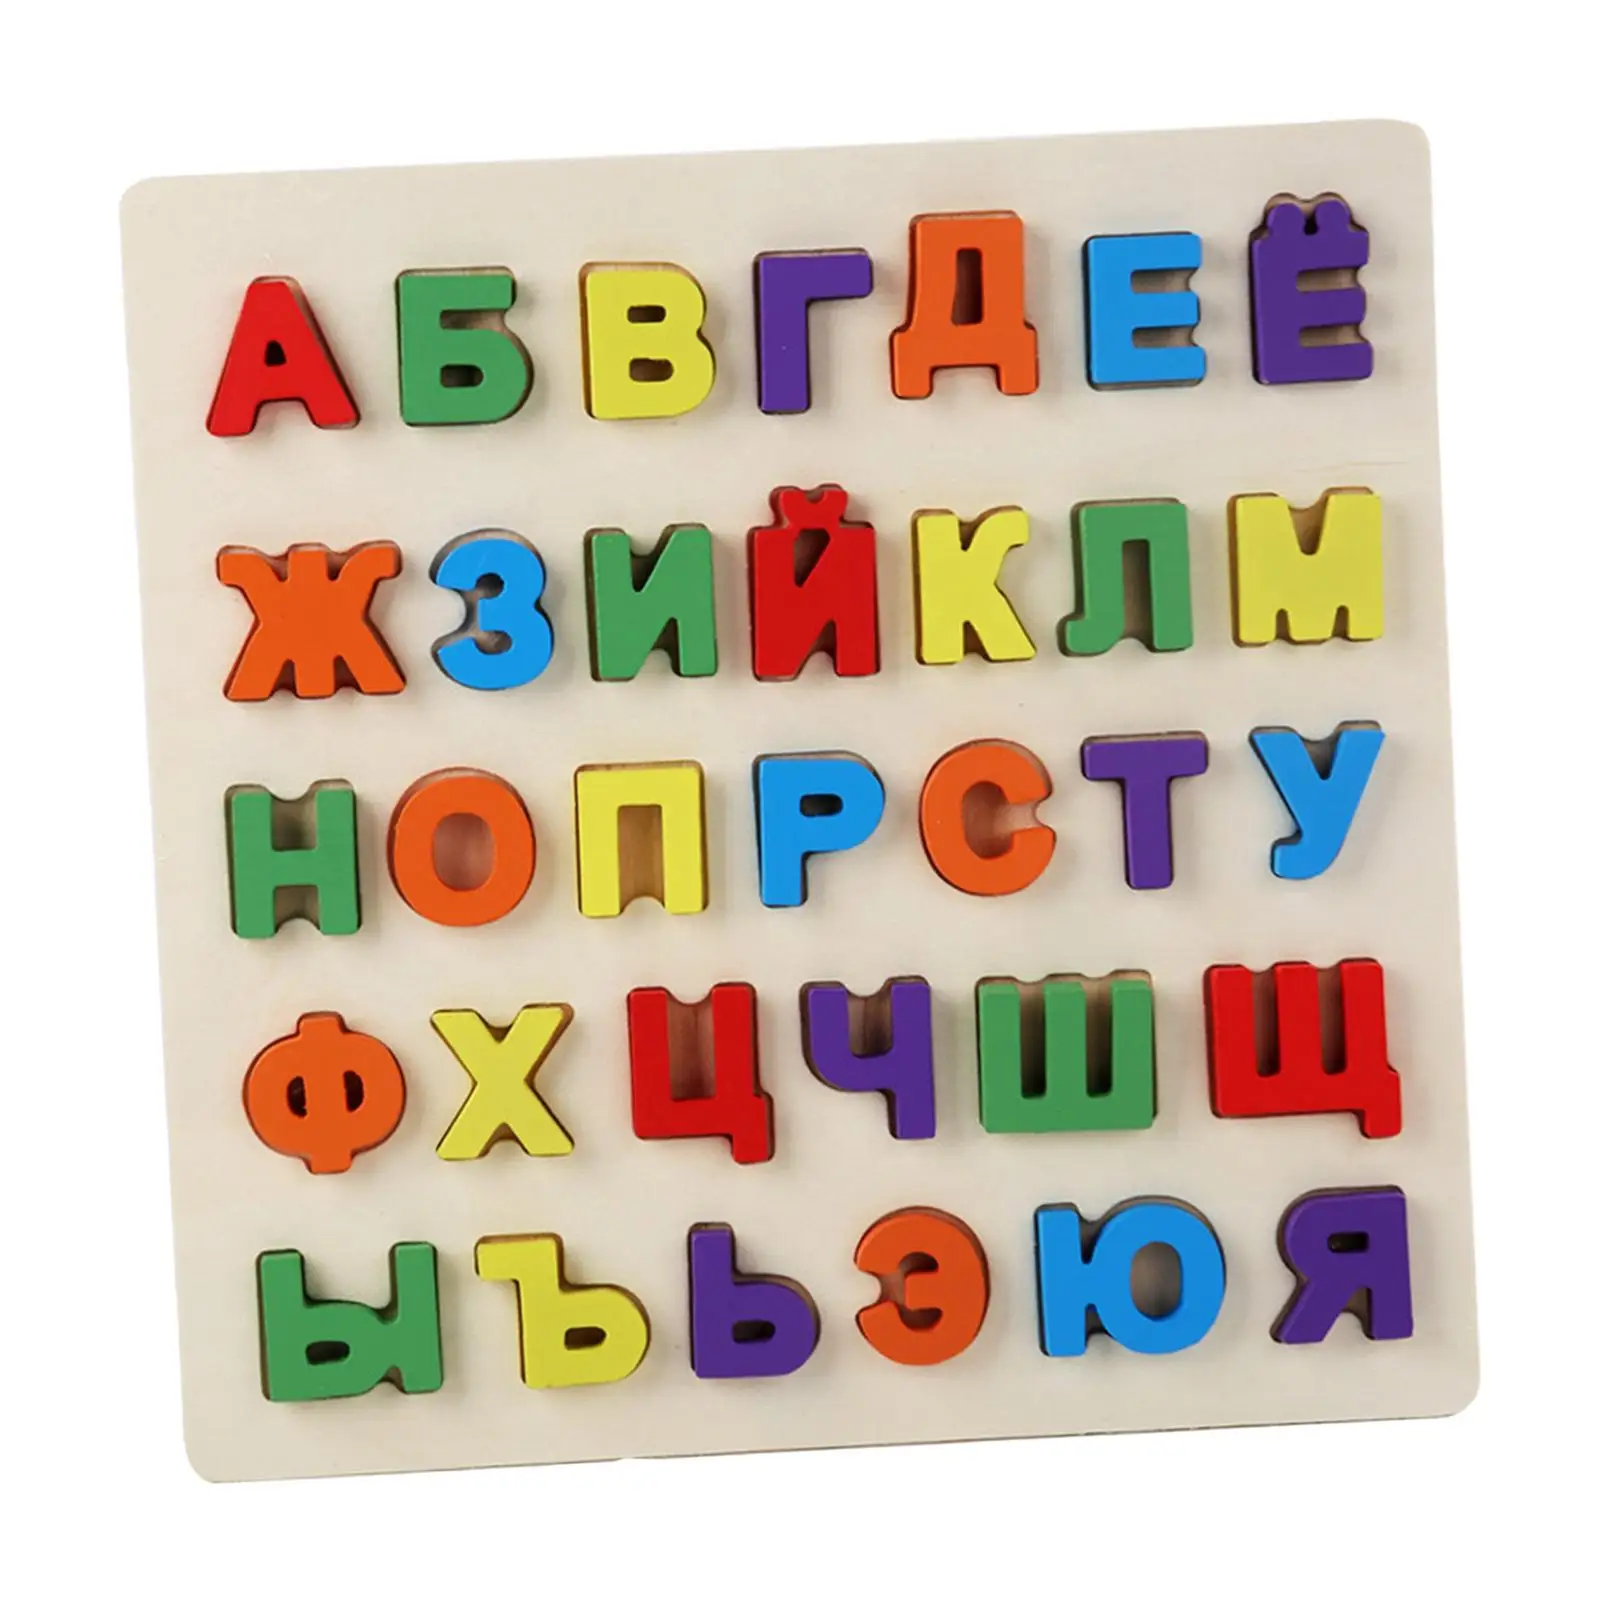 

Russian Alphabet Jigsaw Words Wooden Pegged Puzzles Sorting Activities Preschool Toy Development Colorful for Games Best Gifts